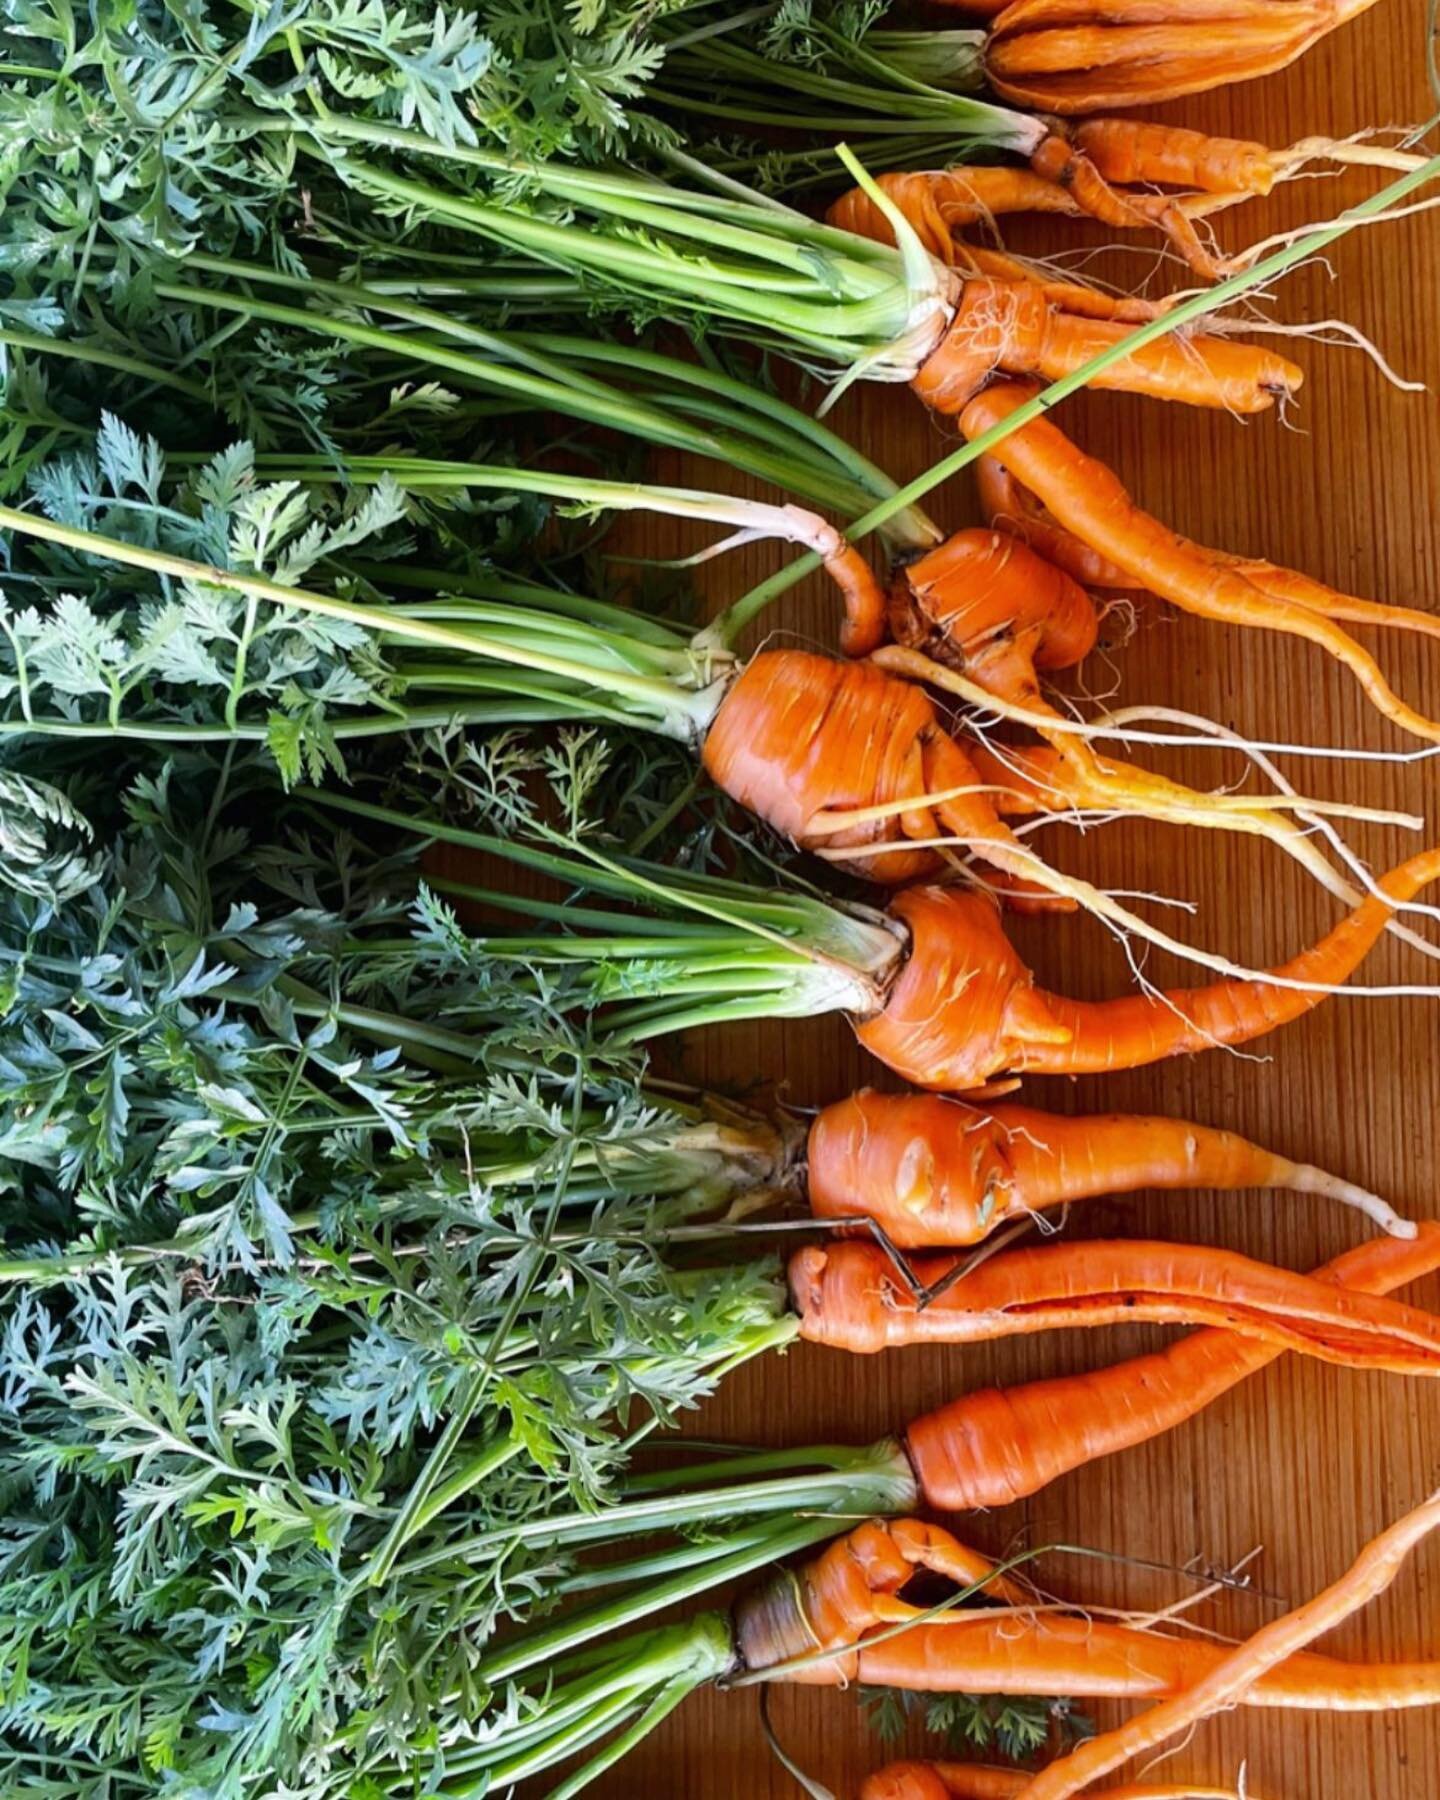 🥕carrots from the garden🥕
rich in vitamins K &amp; A
we love making carrot ginger soup &hellip;
what&rsquo;s your favorite way to process them?